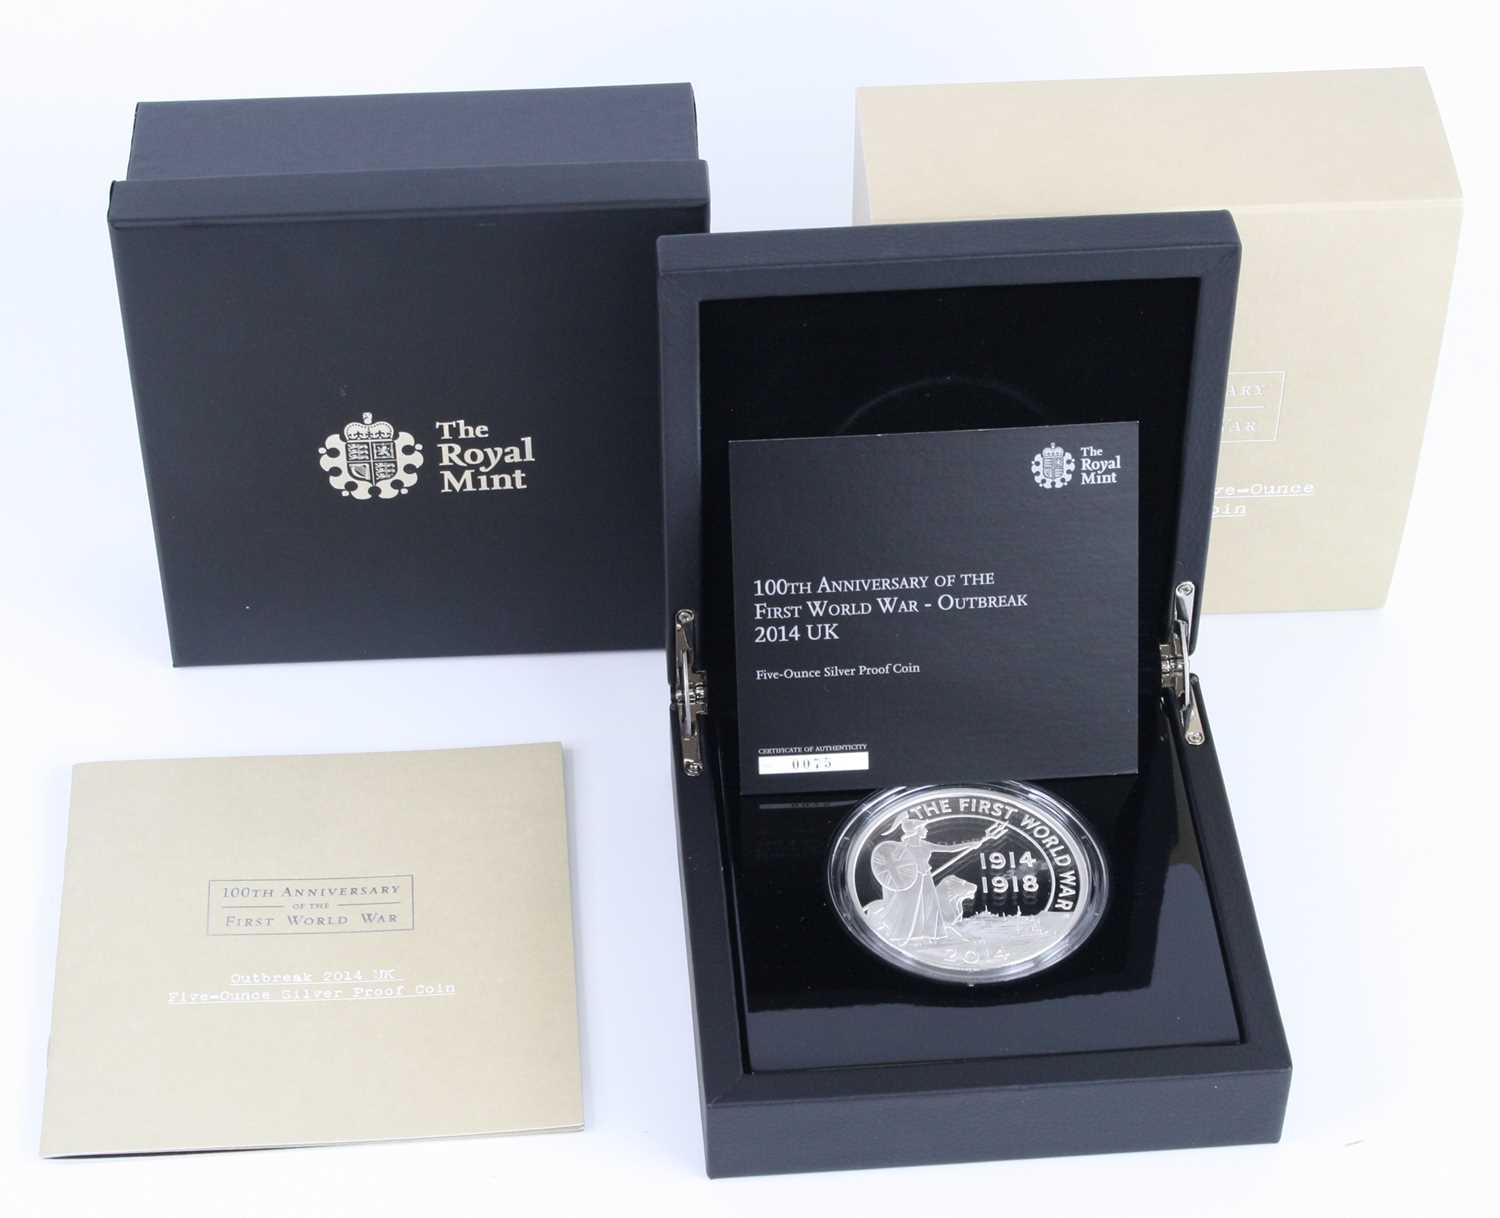 United Kingdom, The Royal Mint, 100th Anniversary of the First World War, Outbreak 2014 Five-Ounce